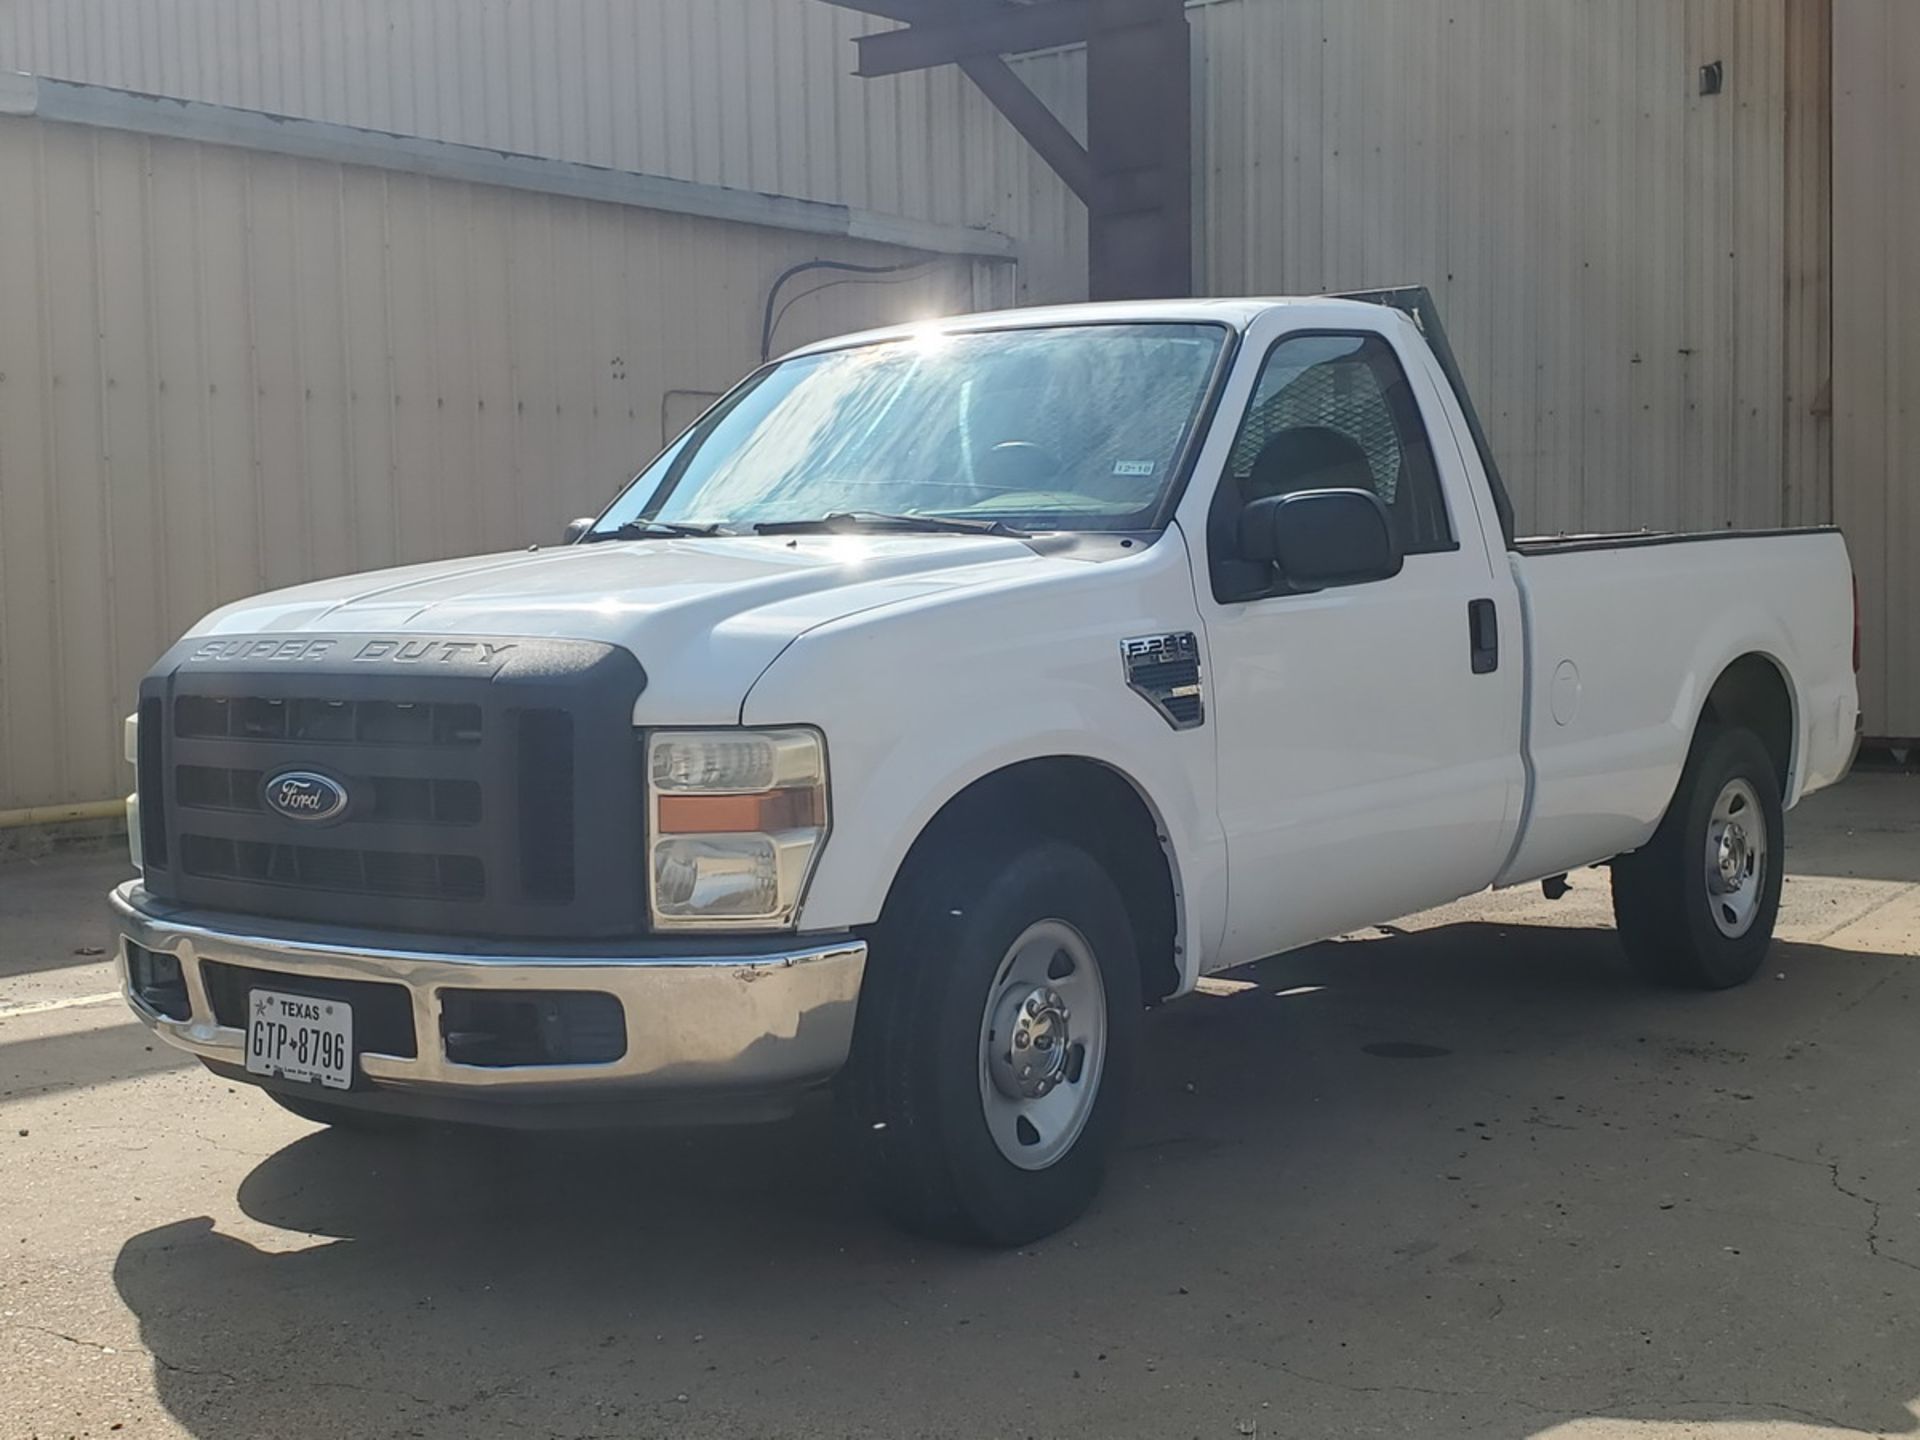 2008 Ford F-250 Pickup V8 Engine, Vin: 1FTN20518ED94781, 95,506 Mileage, Plate: TX GTP-8796 - Image 2 of 16